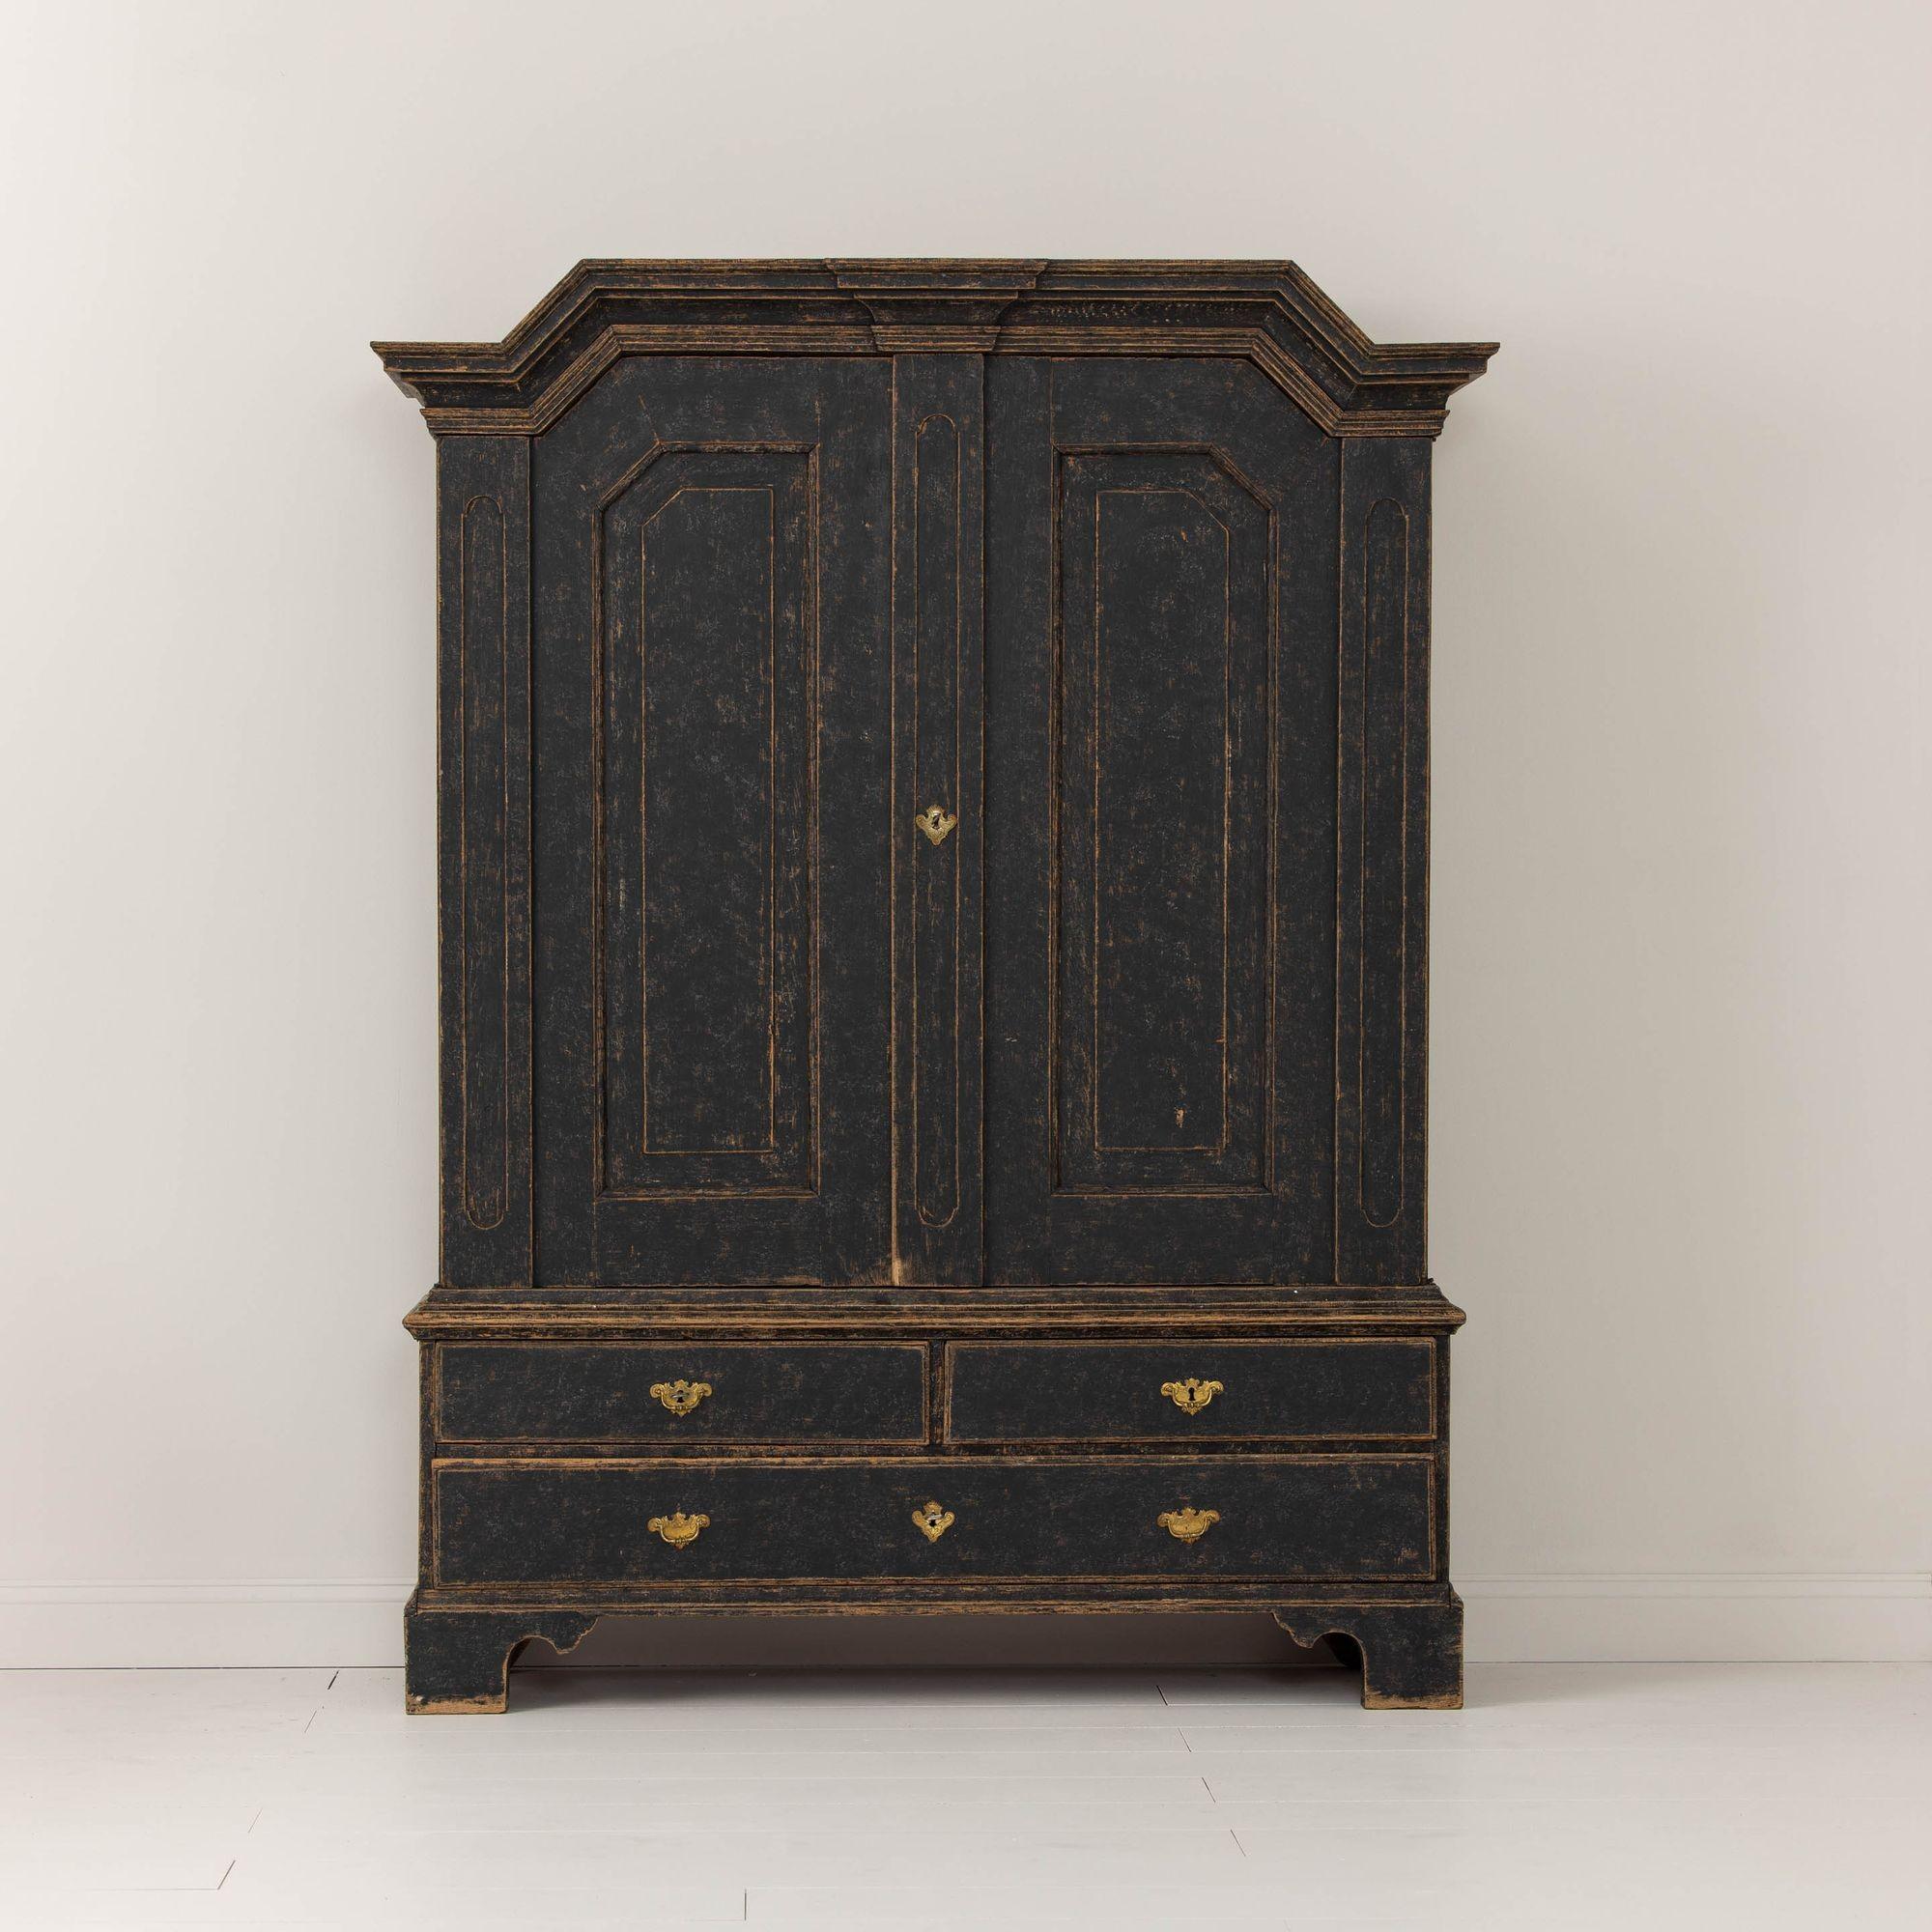 A Swedish black painted linen press from the Baroque period, circa 1750. This piece is made in five parts for easy of transport (lower base, upper frame, 2 doors, and cornice top). Original cast brass hardware. Beautifully proportioned with a shaped